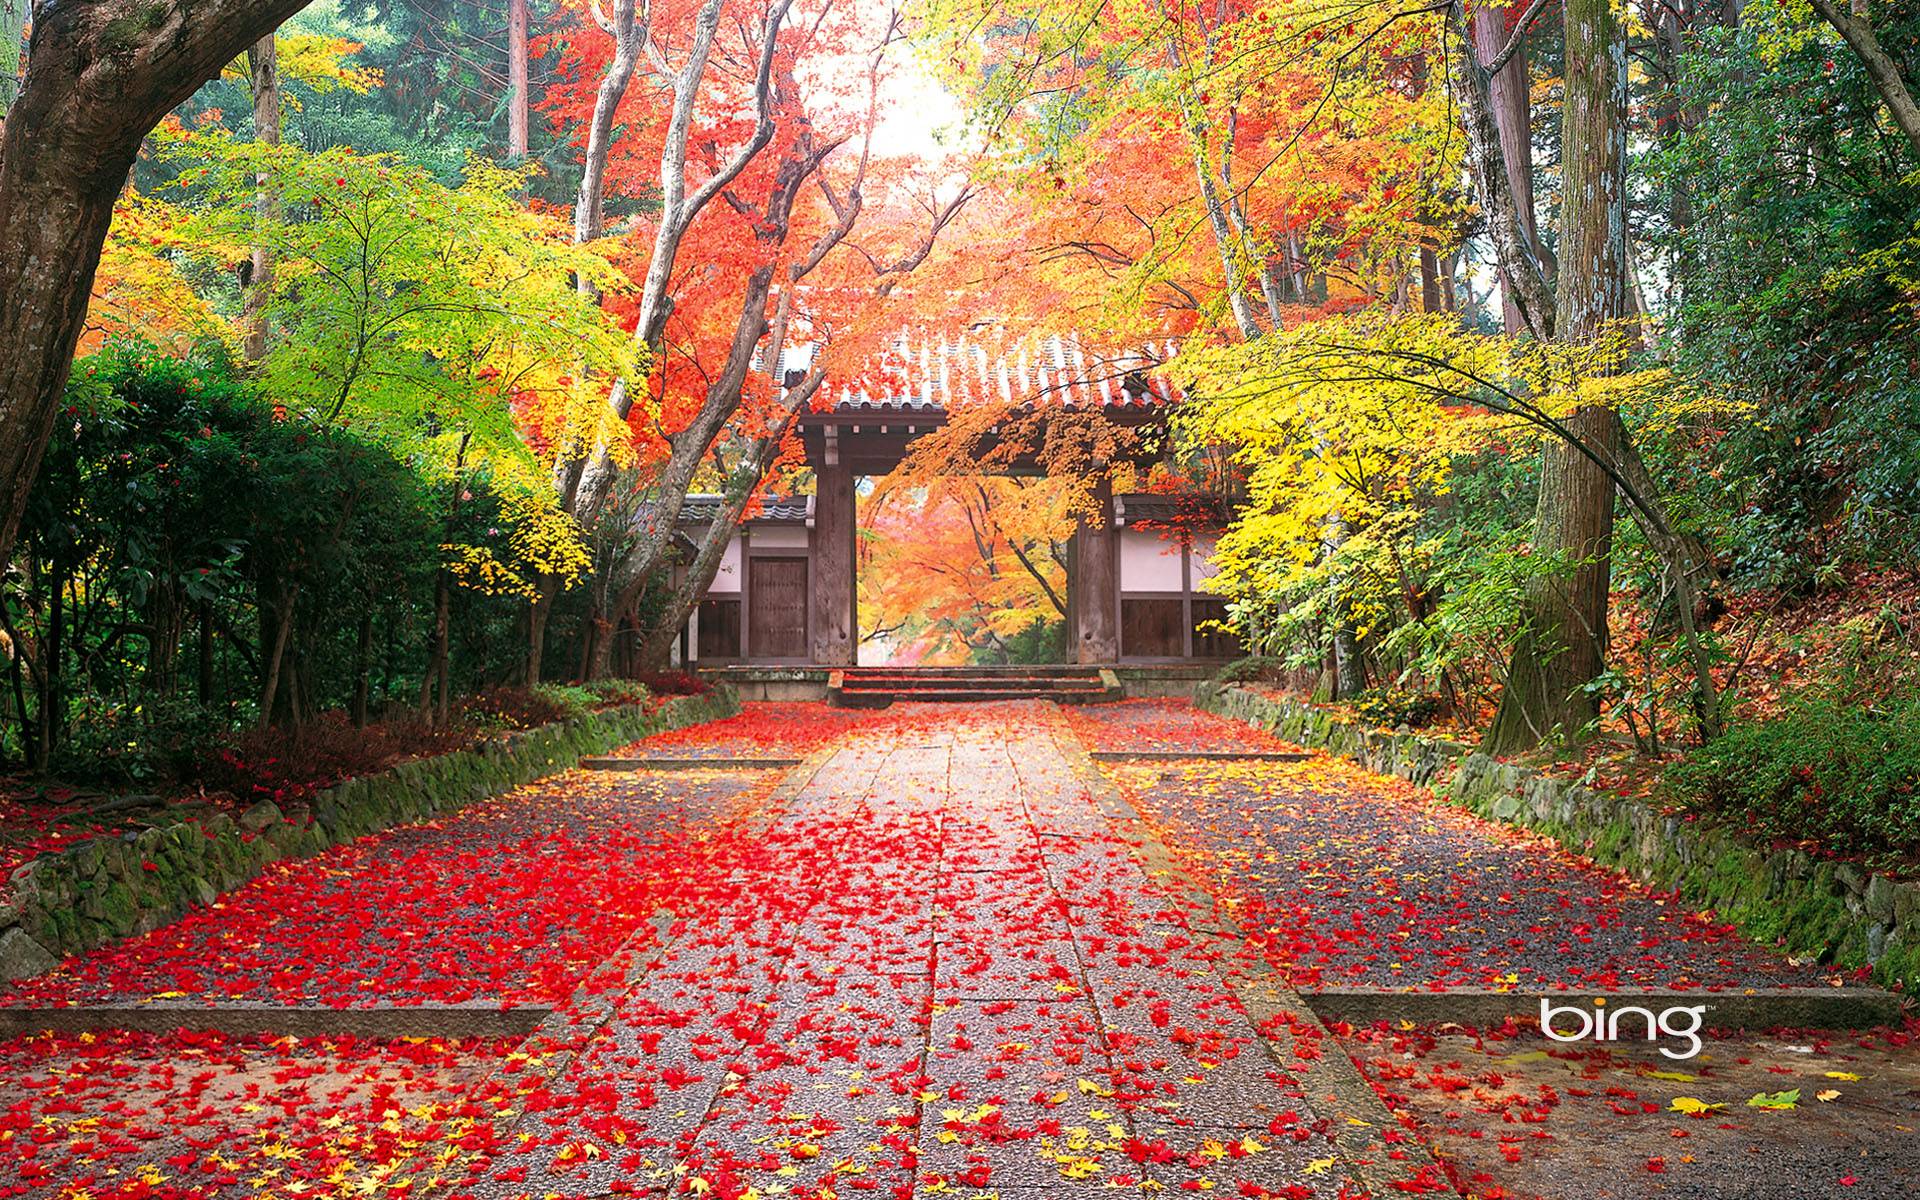 Japanese Nature Wallpapers